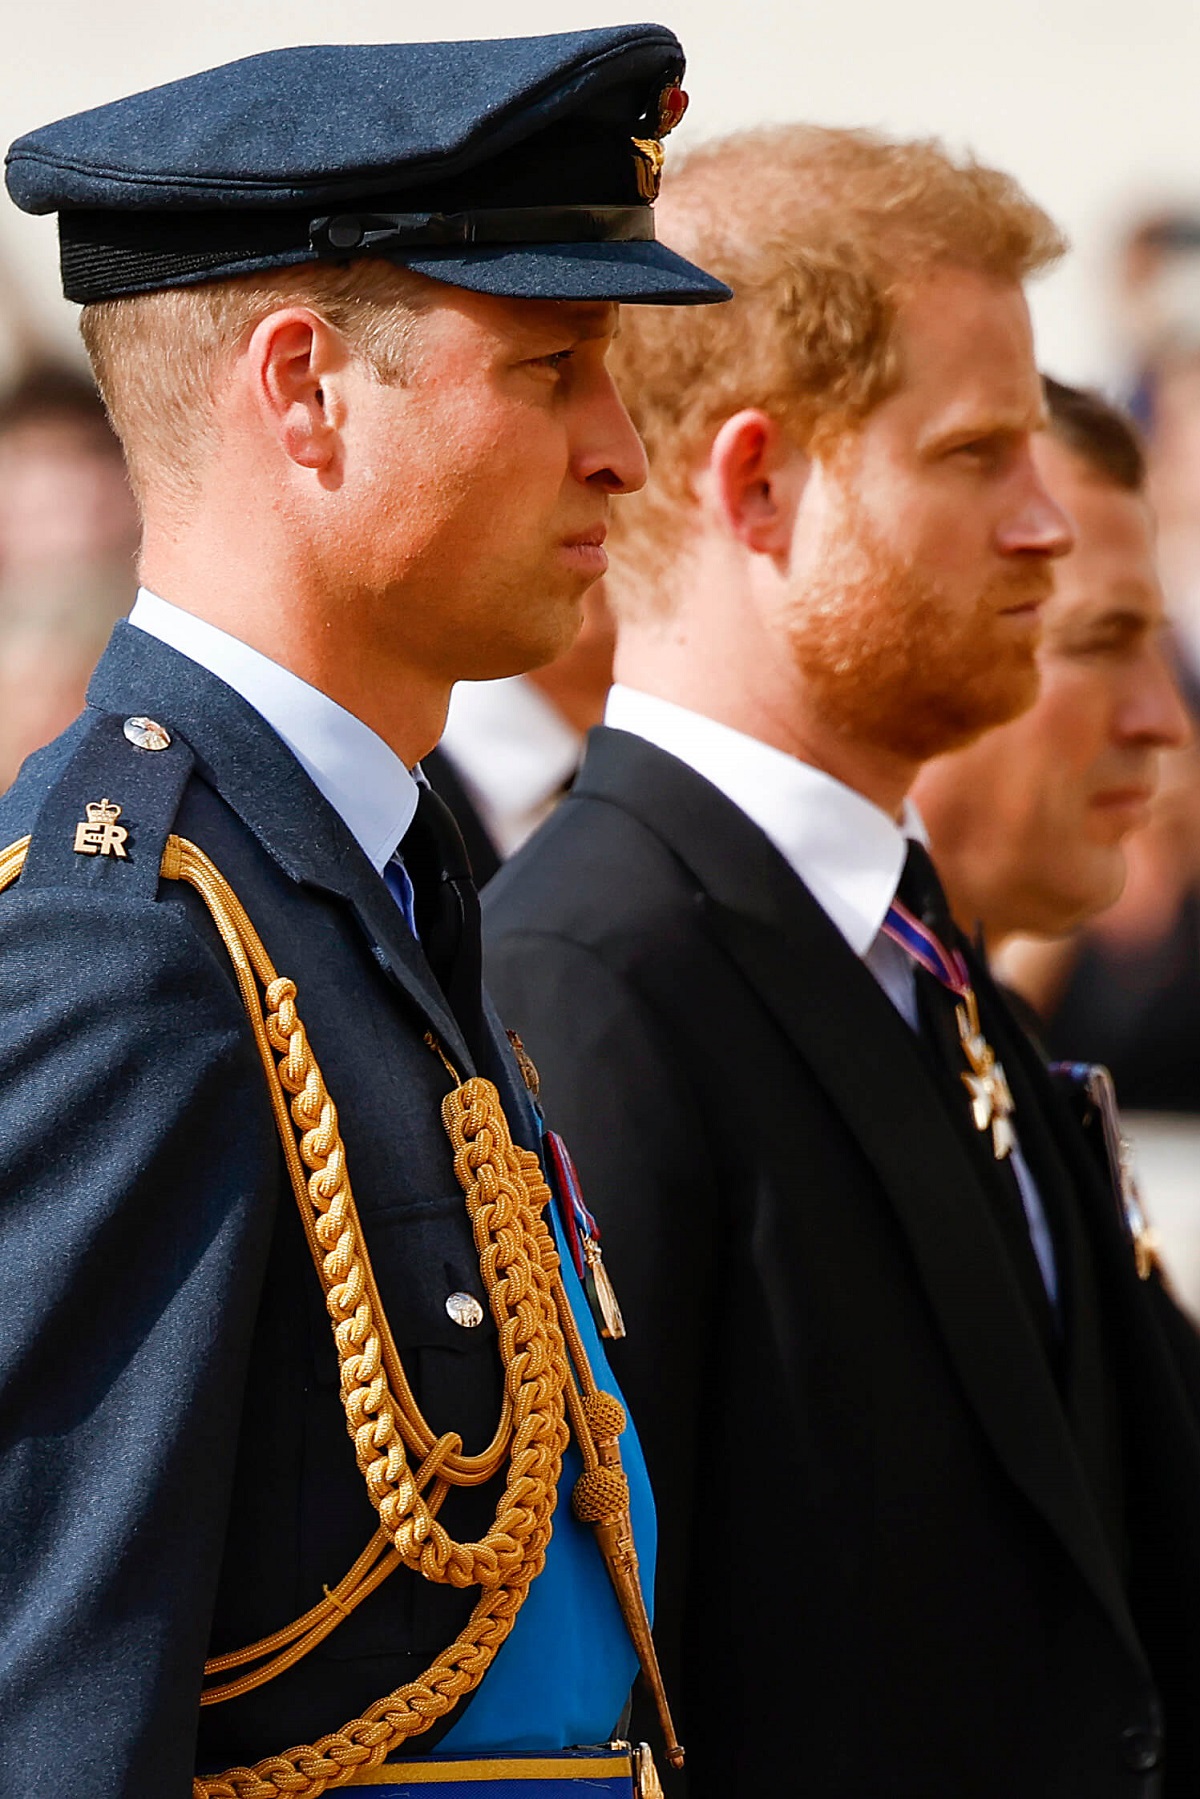 Prince William and Prince Harry walk behind Queen Elizabeth II's coffin during the procession for the Lying-in State